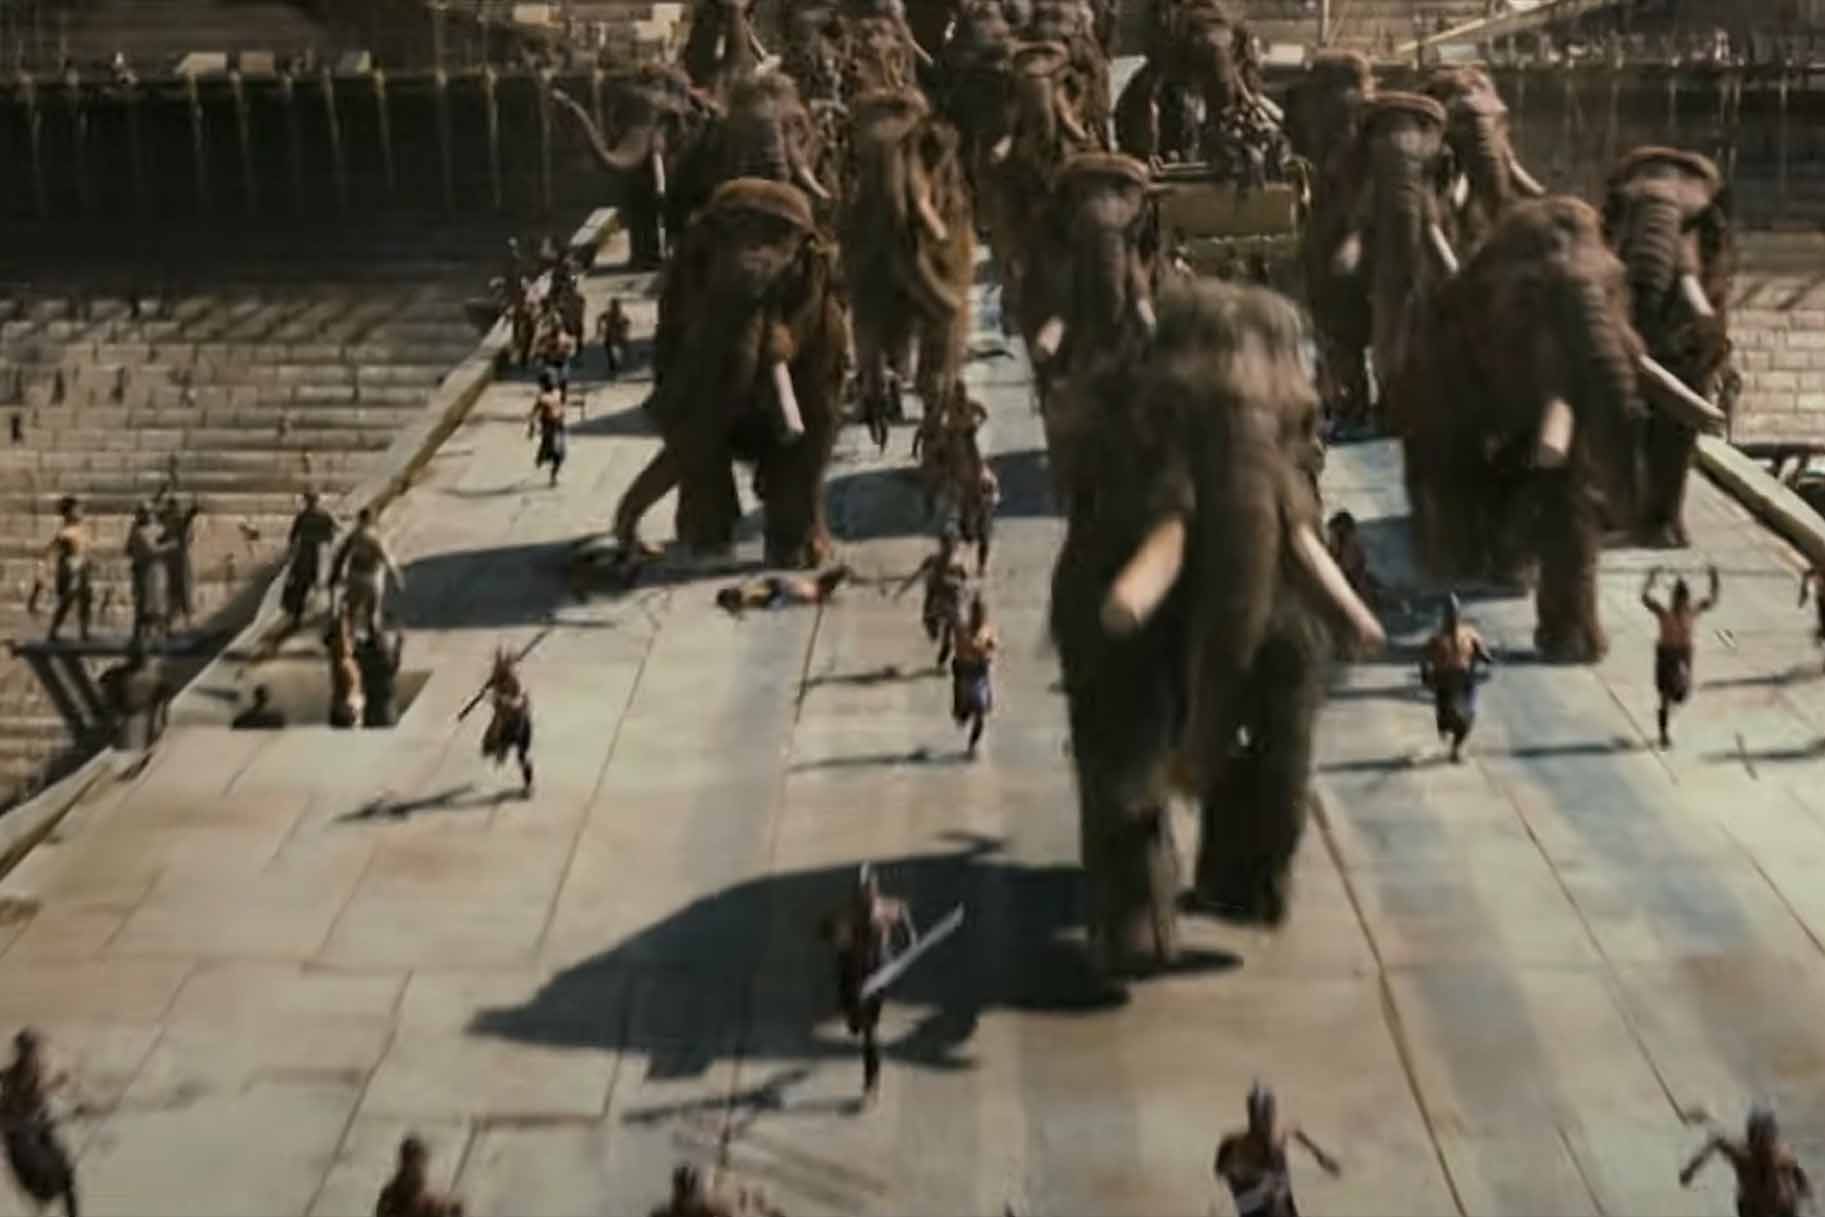 A group of elephants accompanied by humans march on a road in 10,000 BC (2008).